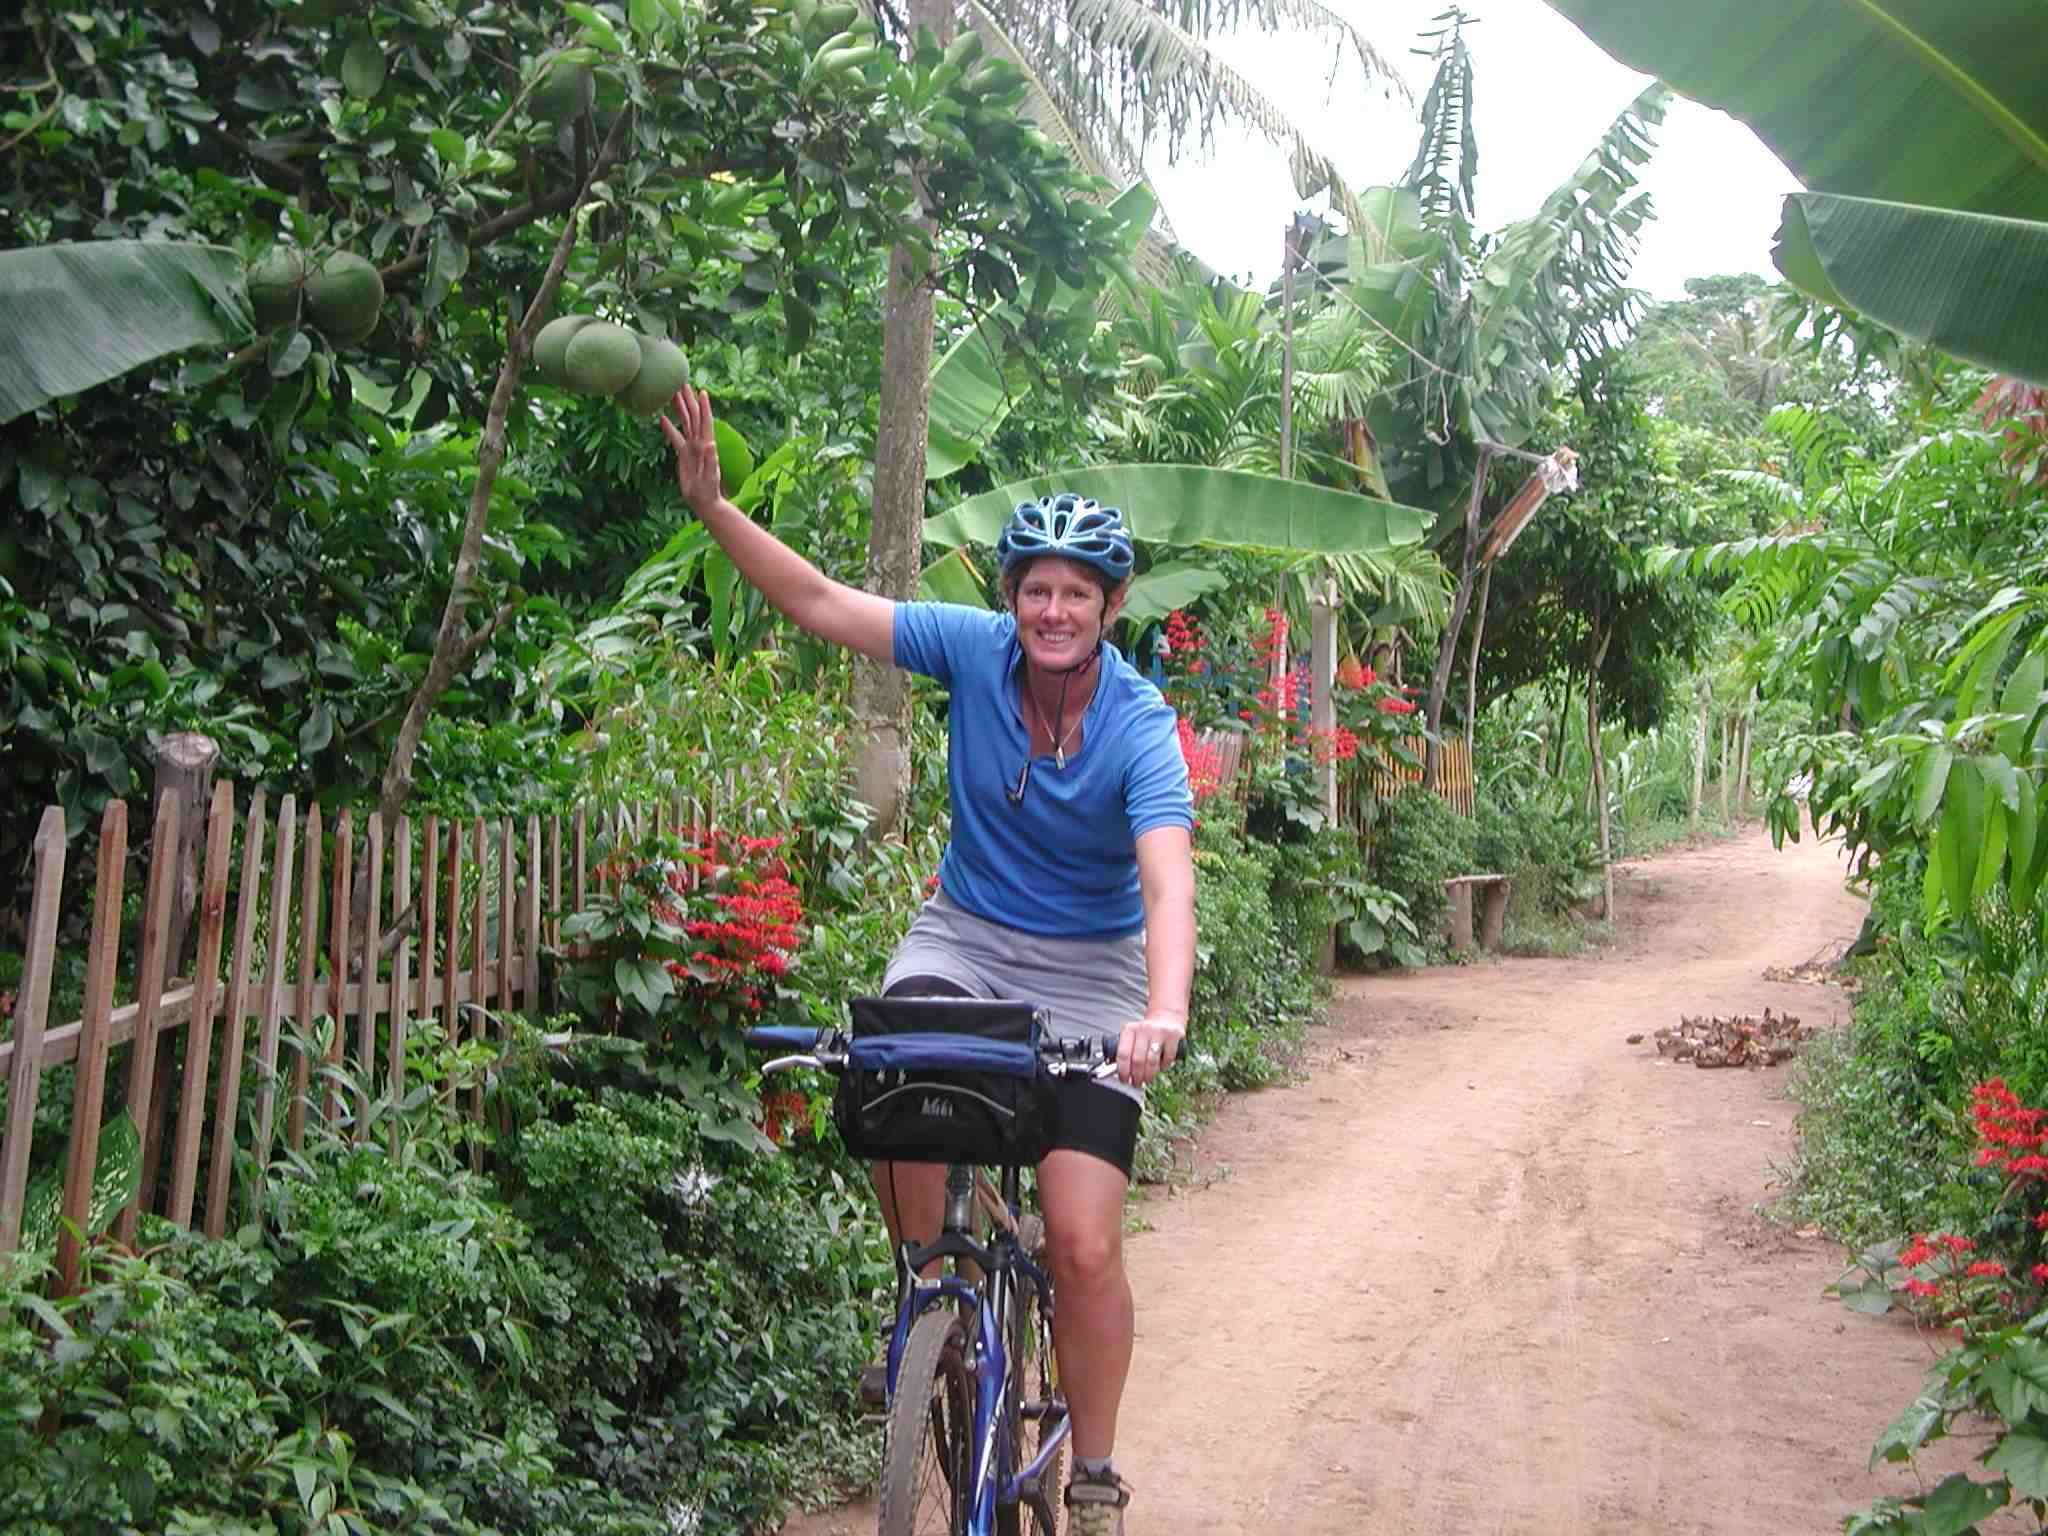 01 Days - BIKING TOUR TO DISCOVER HANOI COUNTRYSIDE AND RED RIVER DELTA